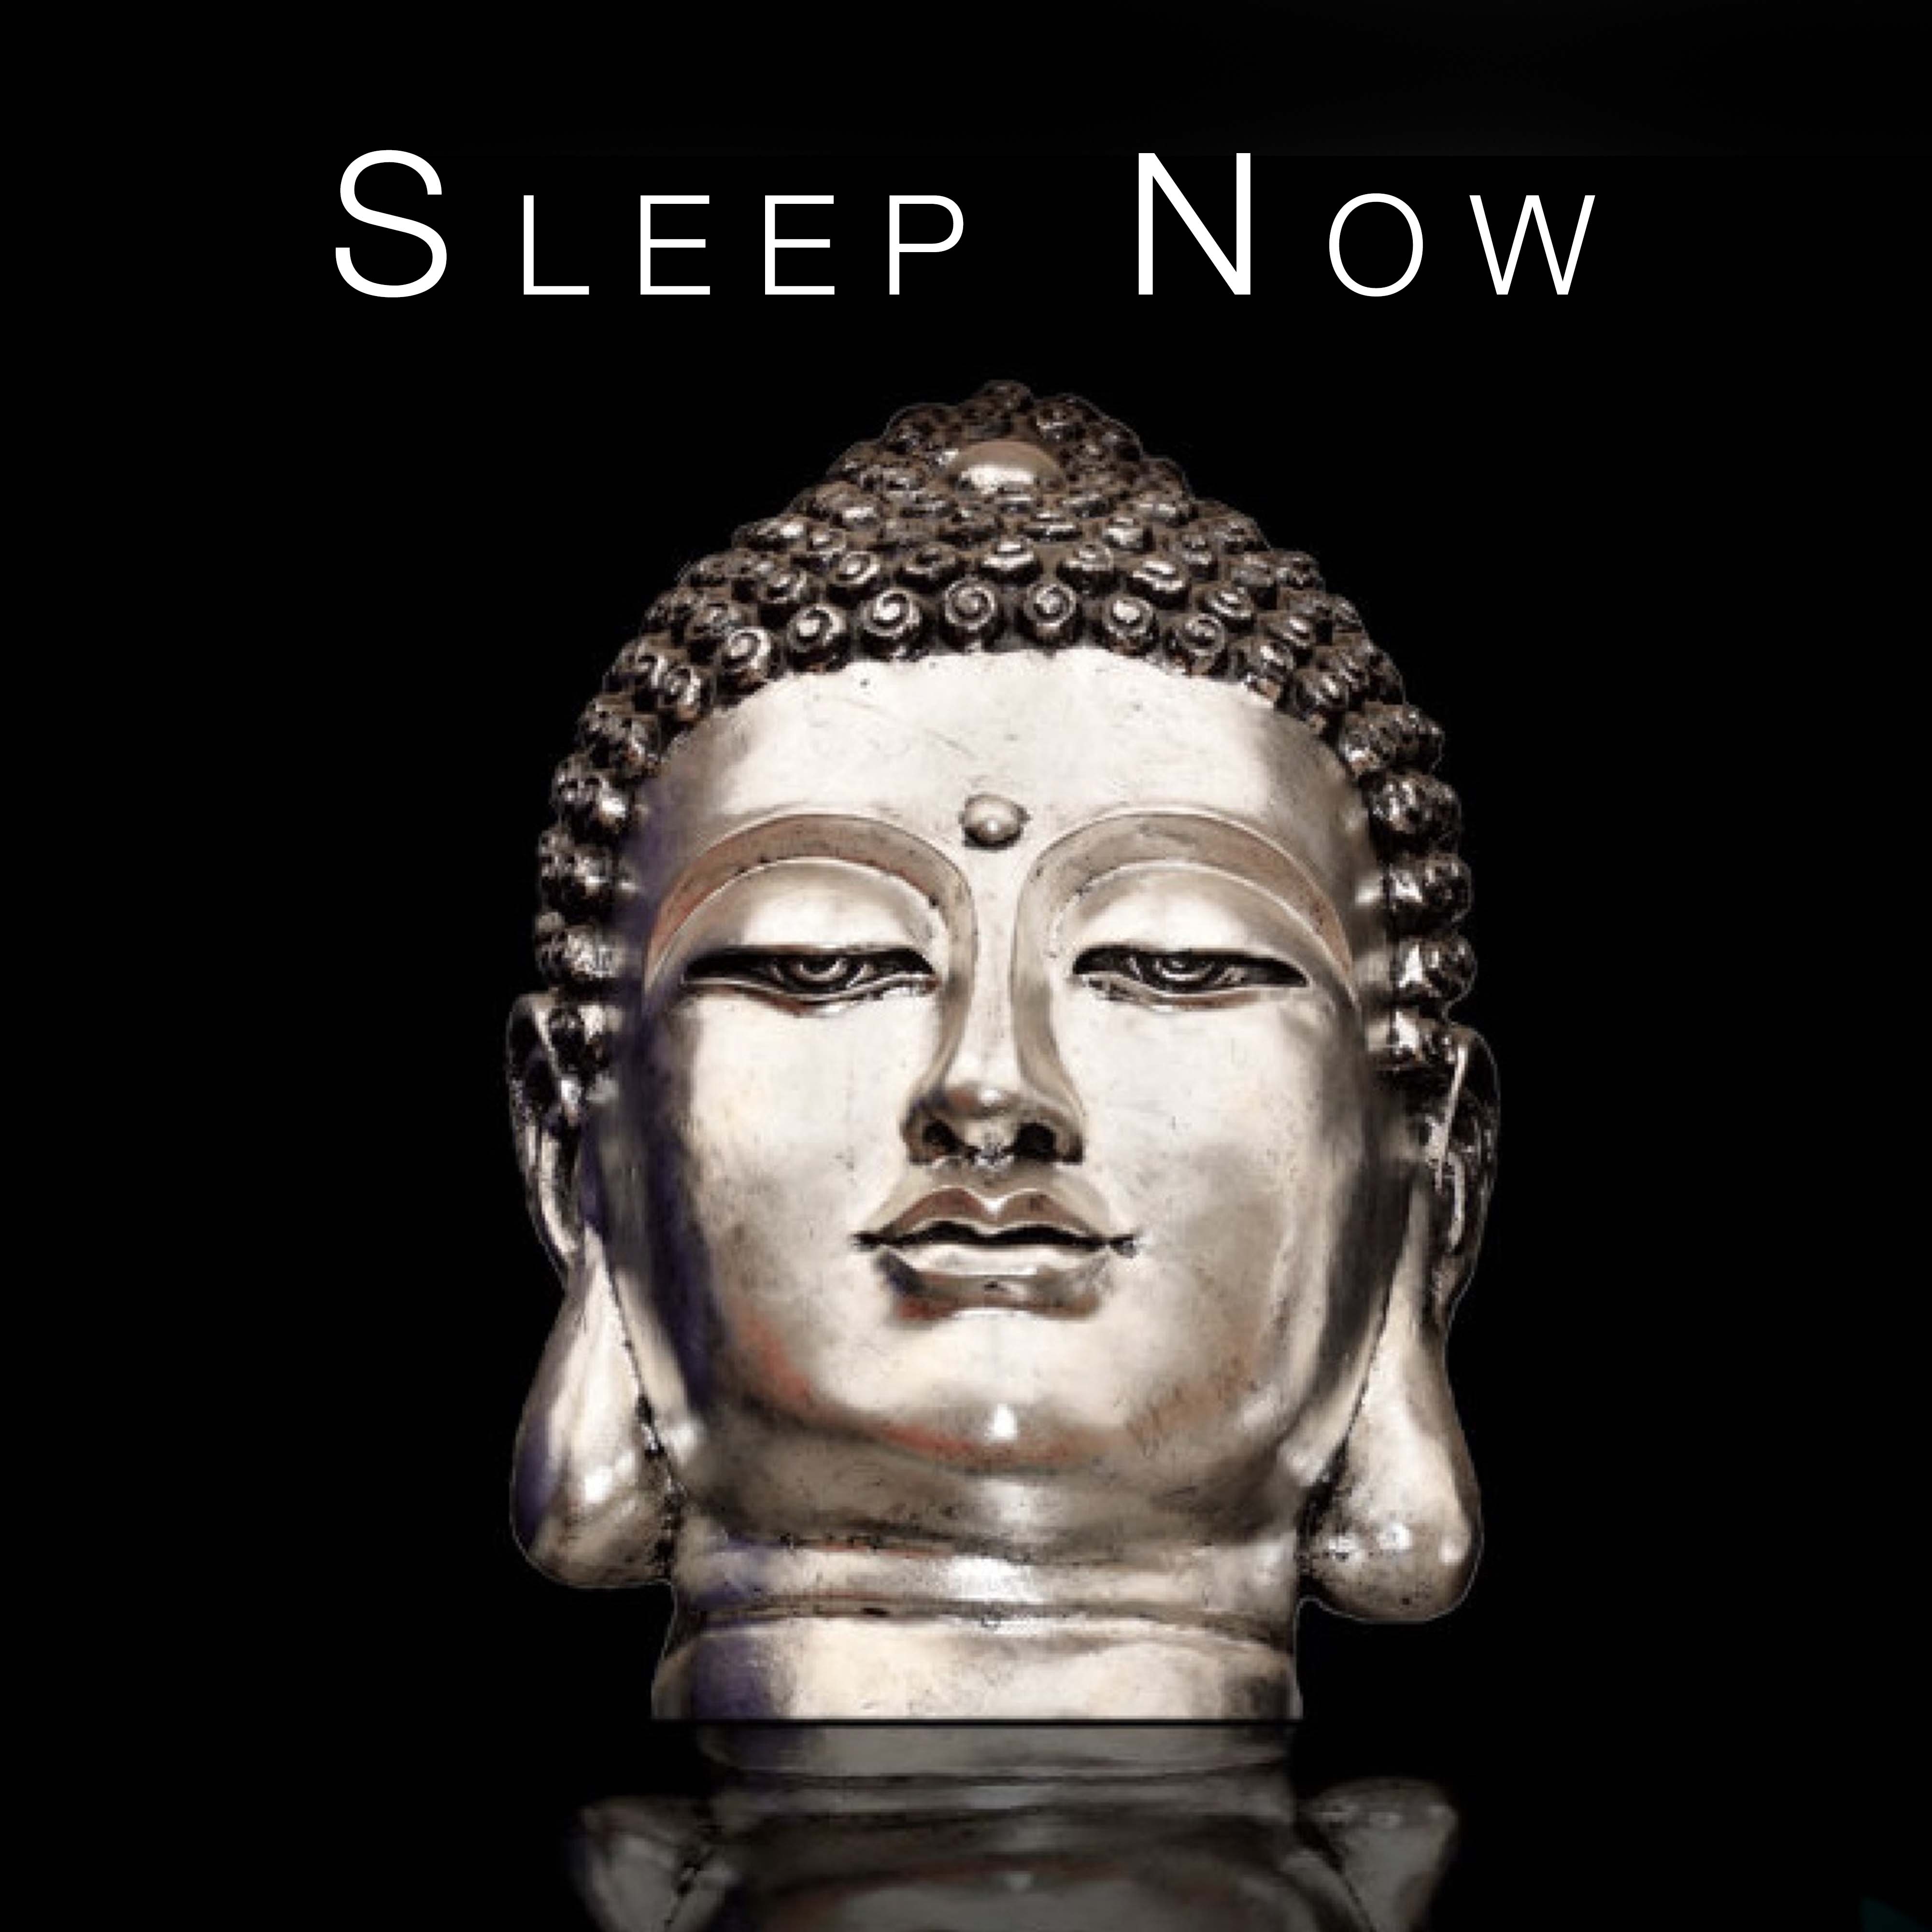 Sleep Now - This Music Is Designed to Help You Relax and Sleep